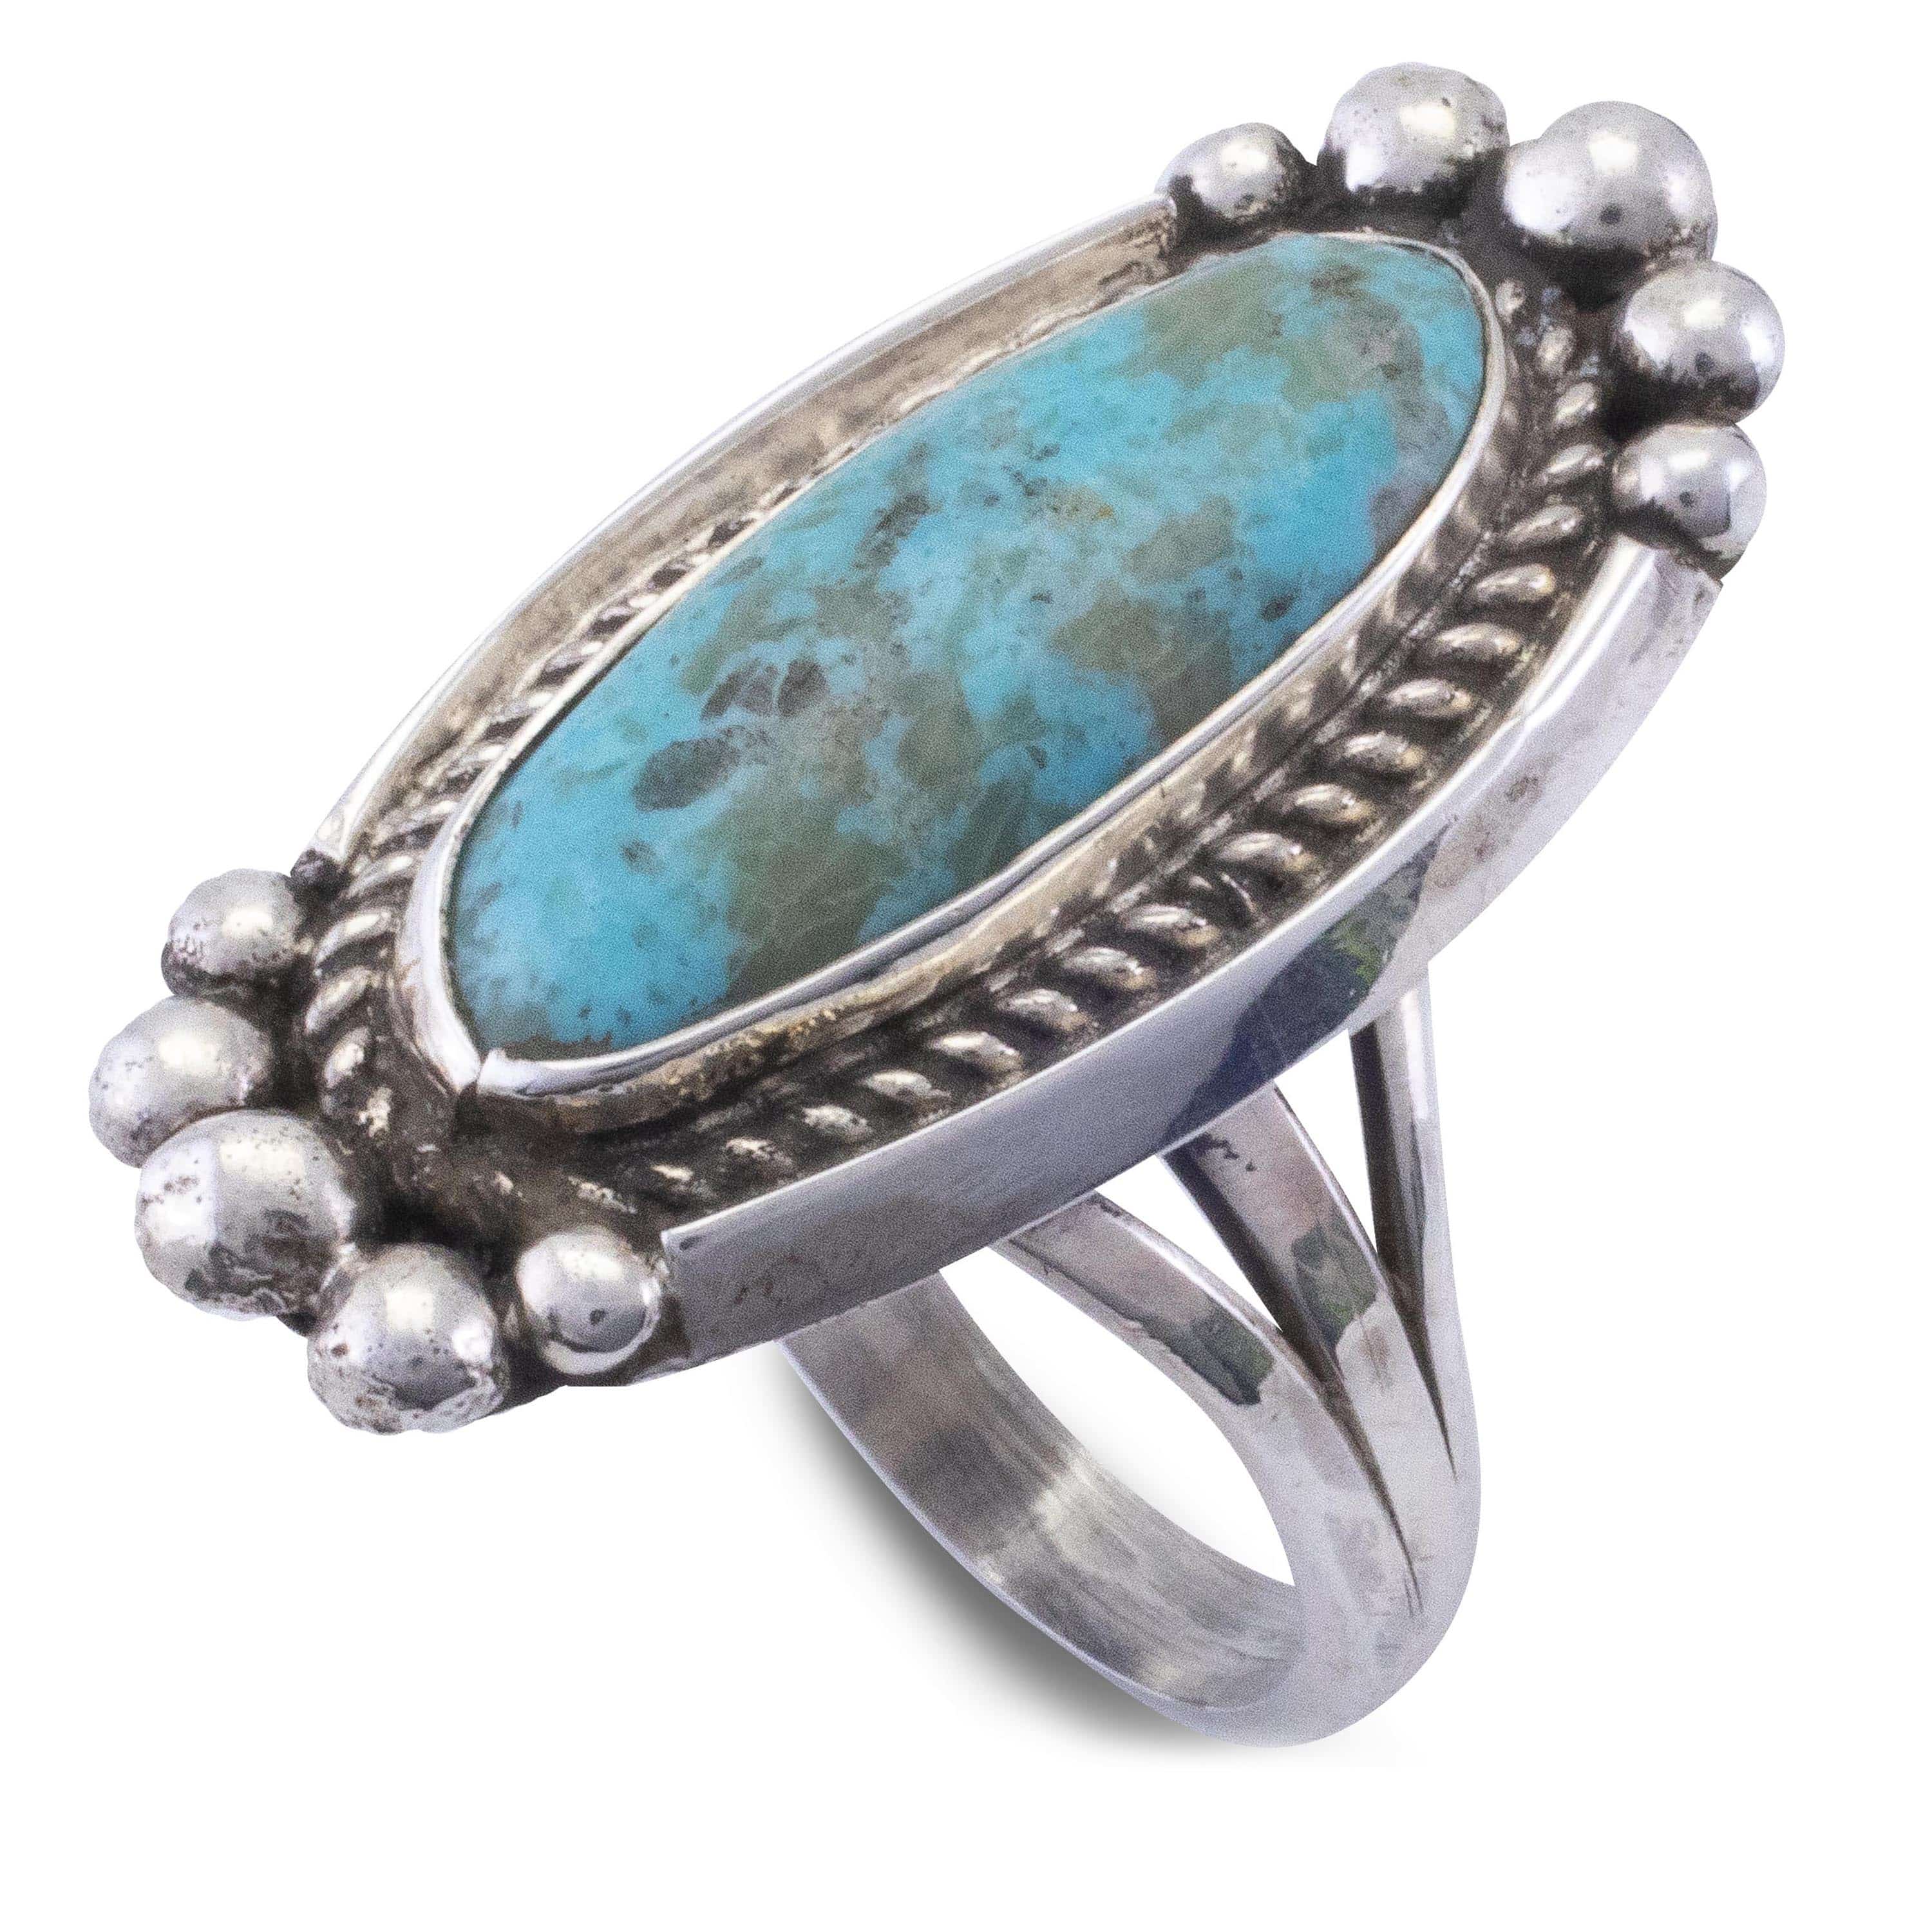 Kalifano Native American Jewelry Tyrone Turquoise USA Native American Made 925 Sterling Silver Ring